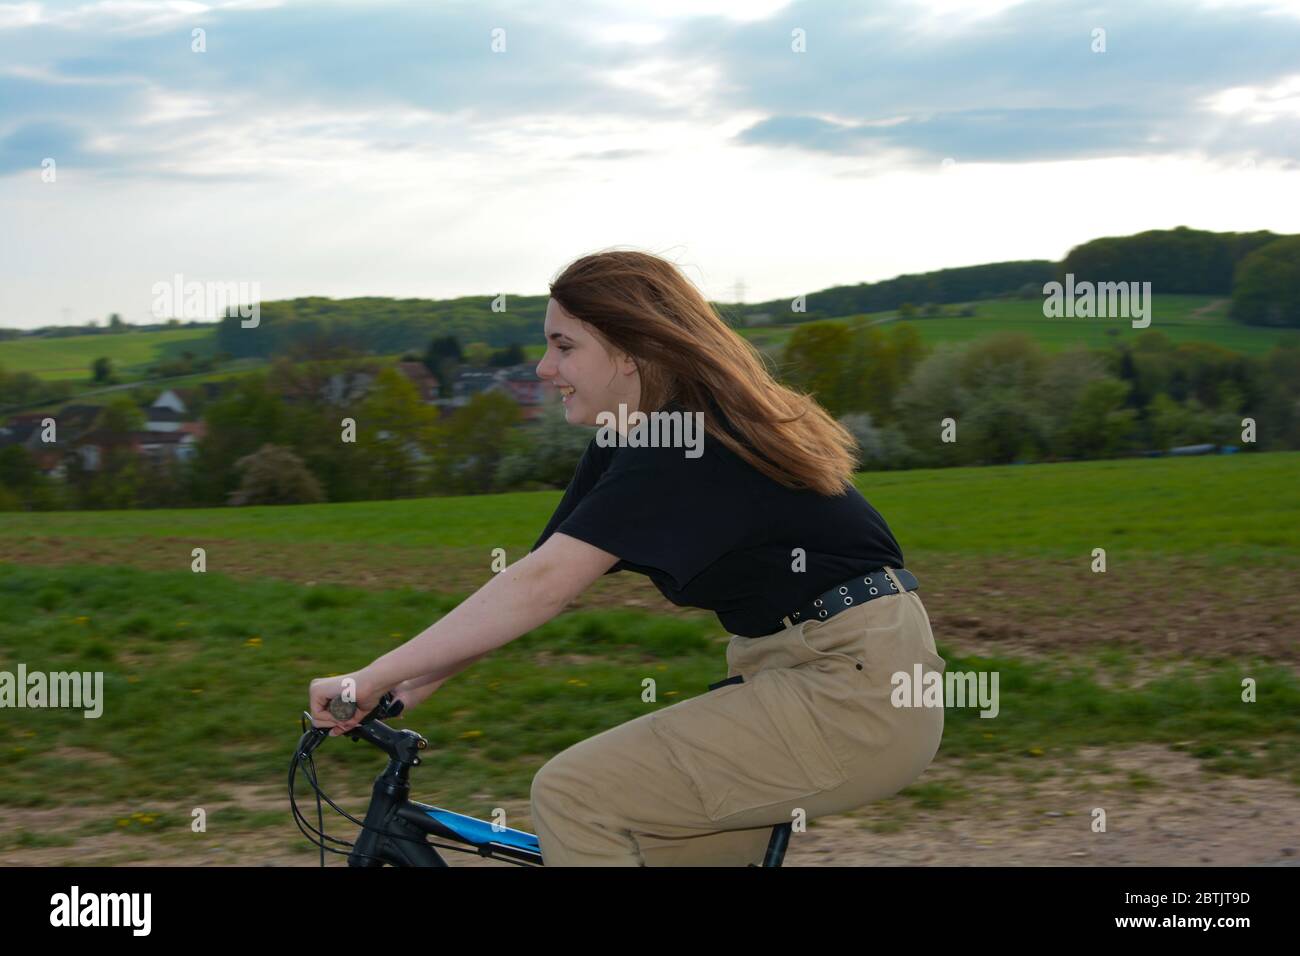 Young woman from the side, sits on a bike and drives on a lonely country road in green nature with blue sky and a village in the background Stock Photo